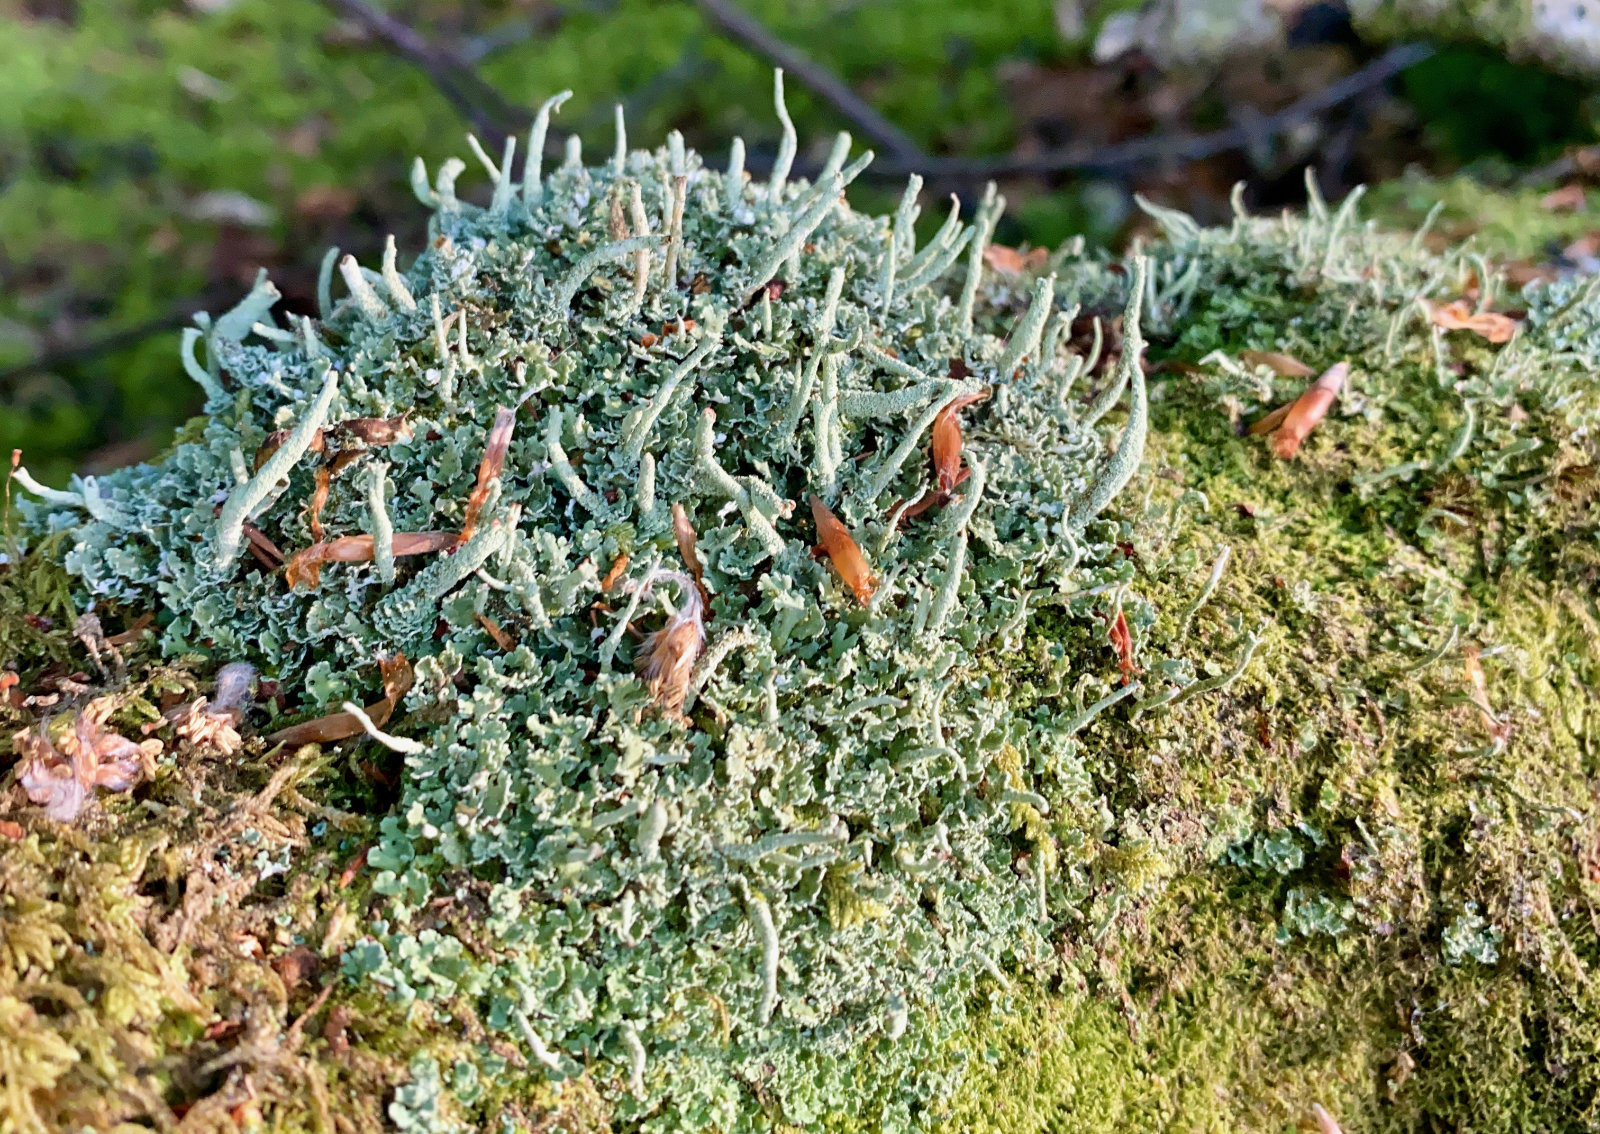 An image of pale green lichen growing out of a patch of bright green moss, like coral in a reef.